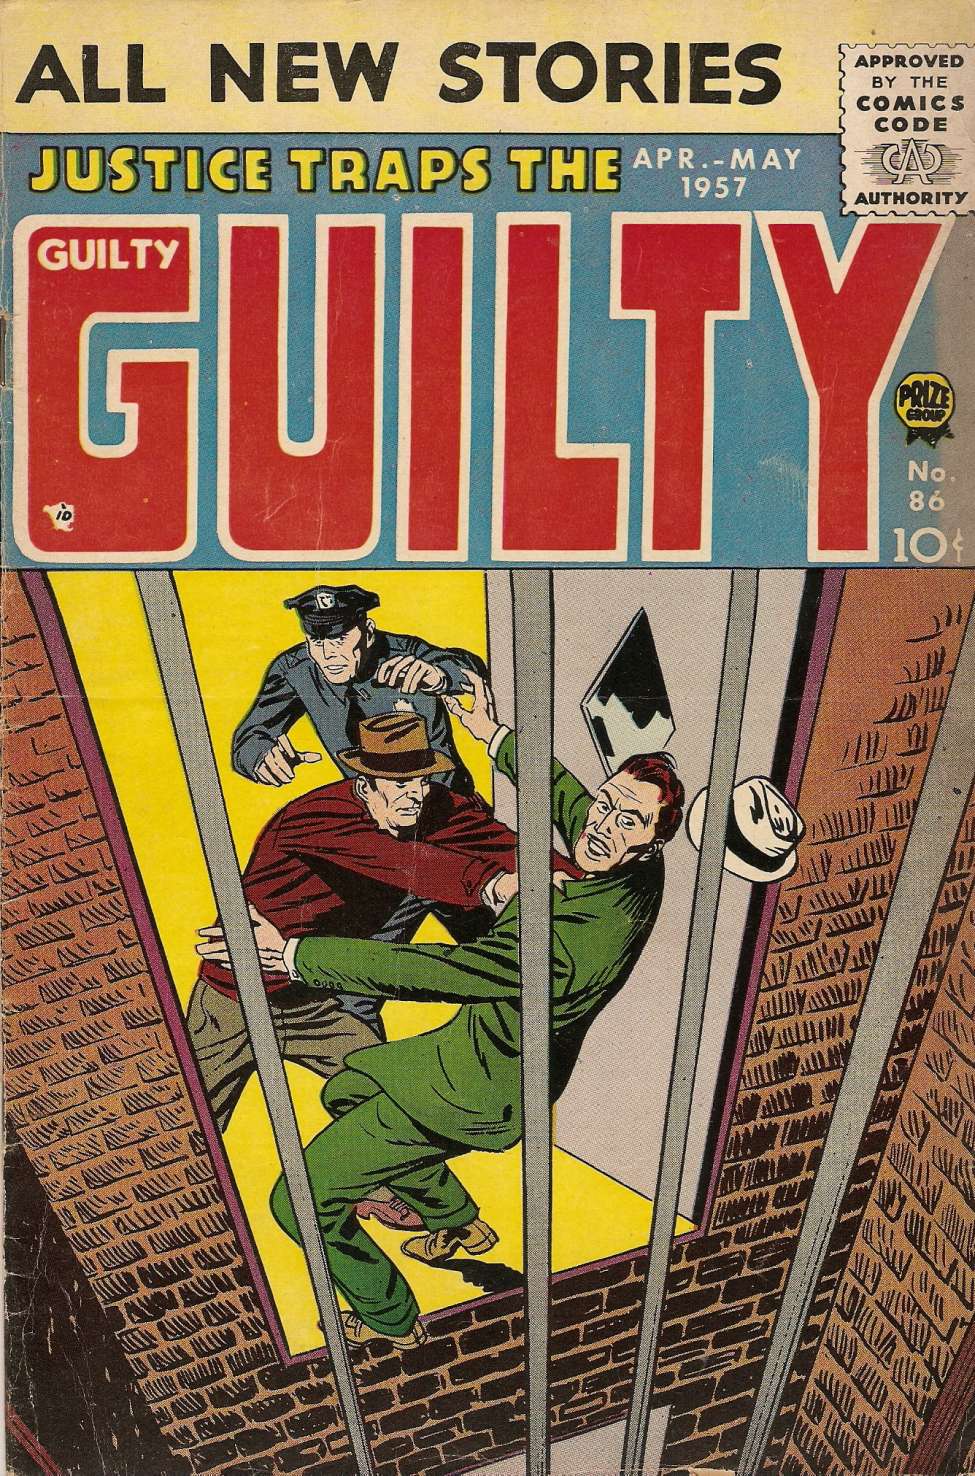 Comic Book Cover For Justice Traps the Guilty 86